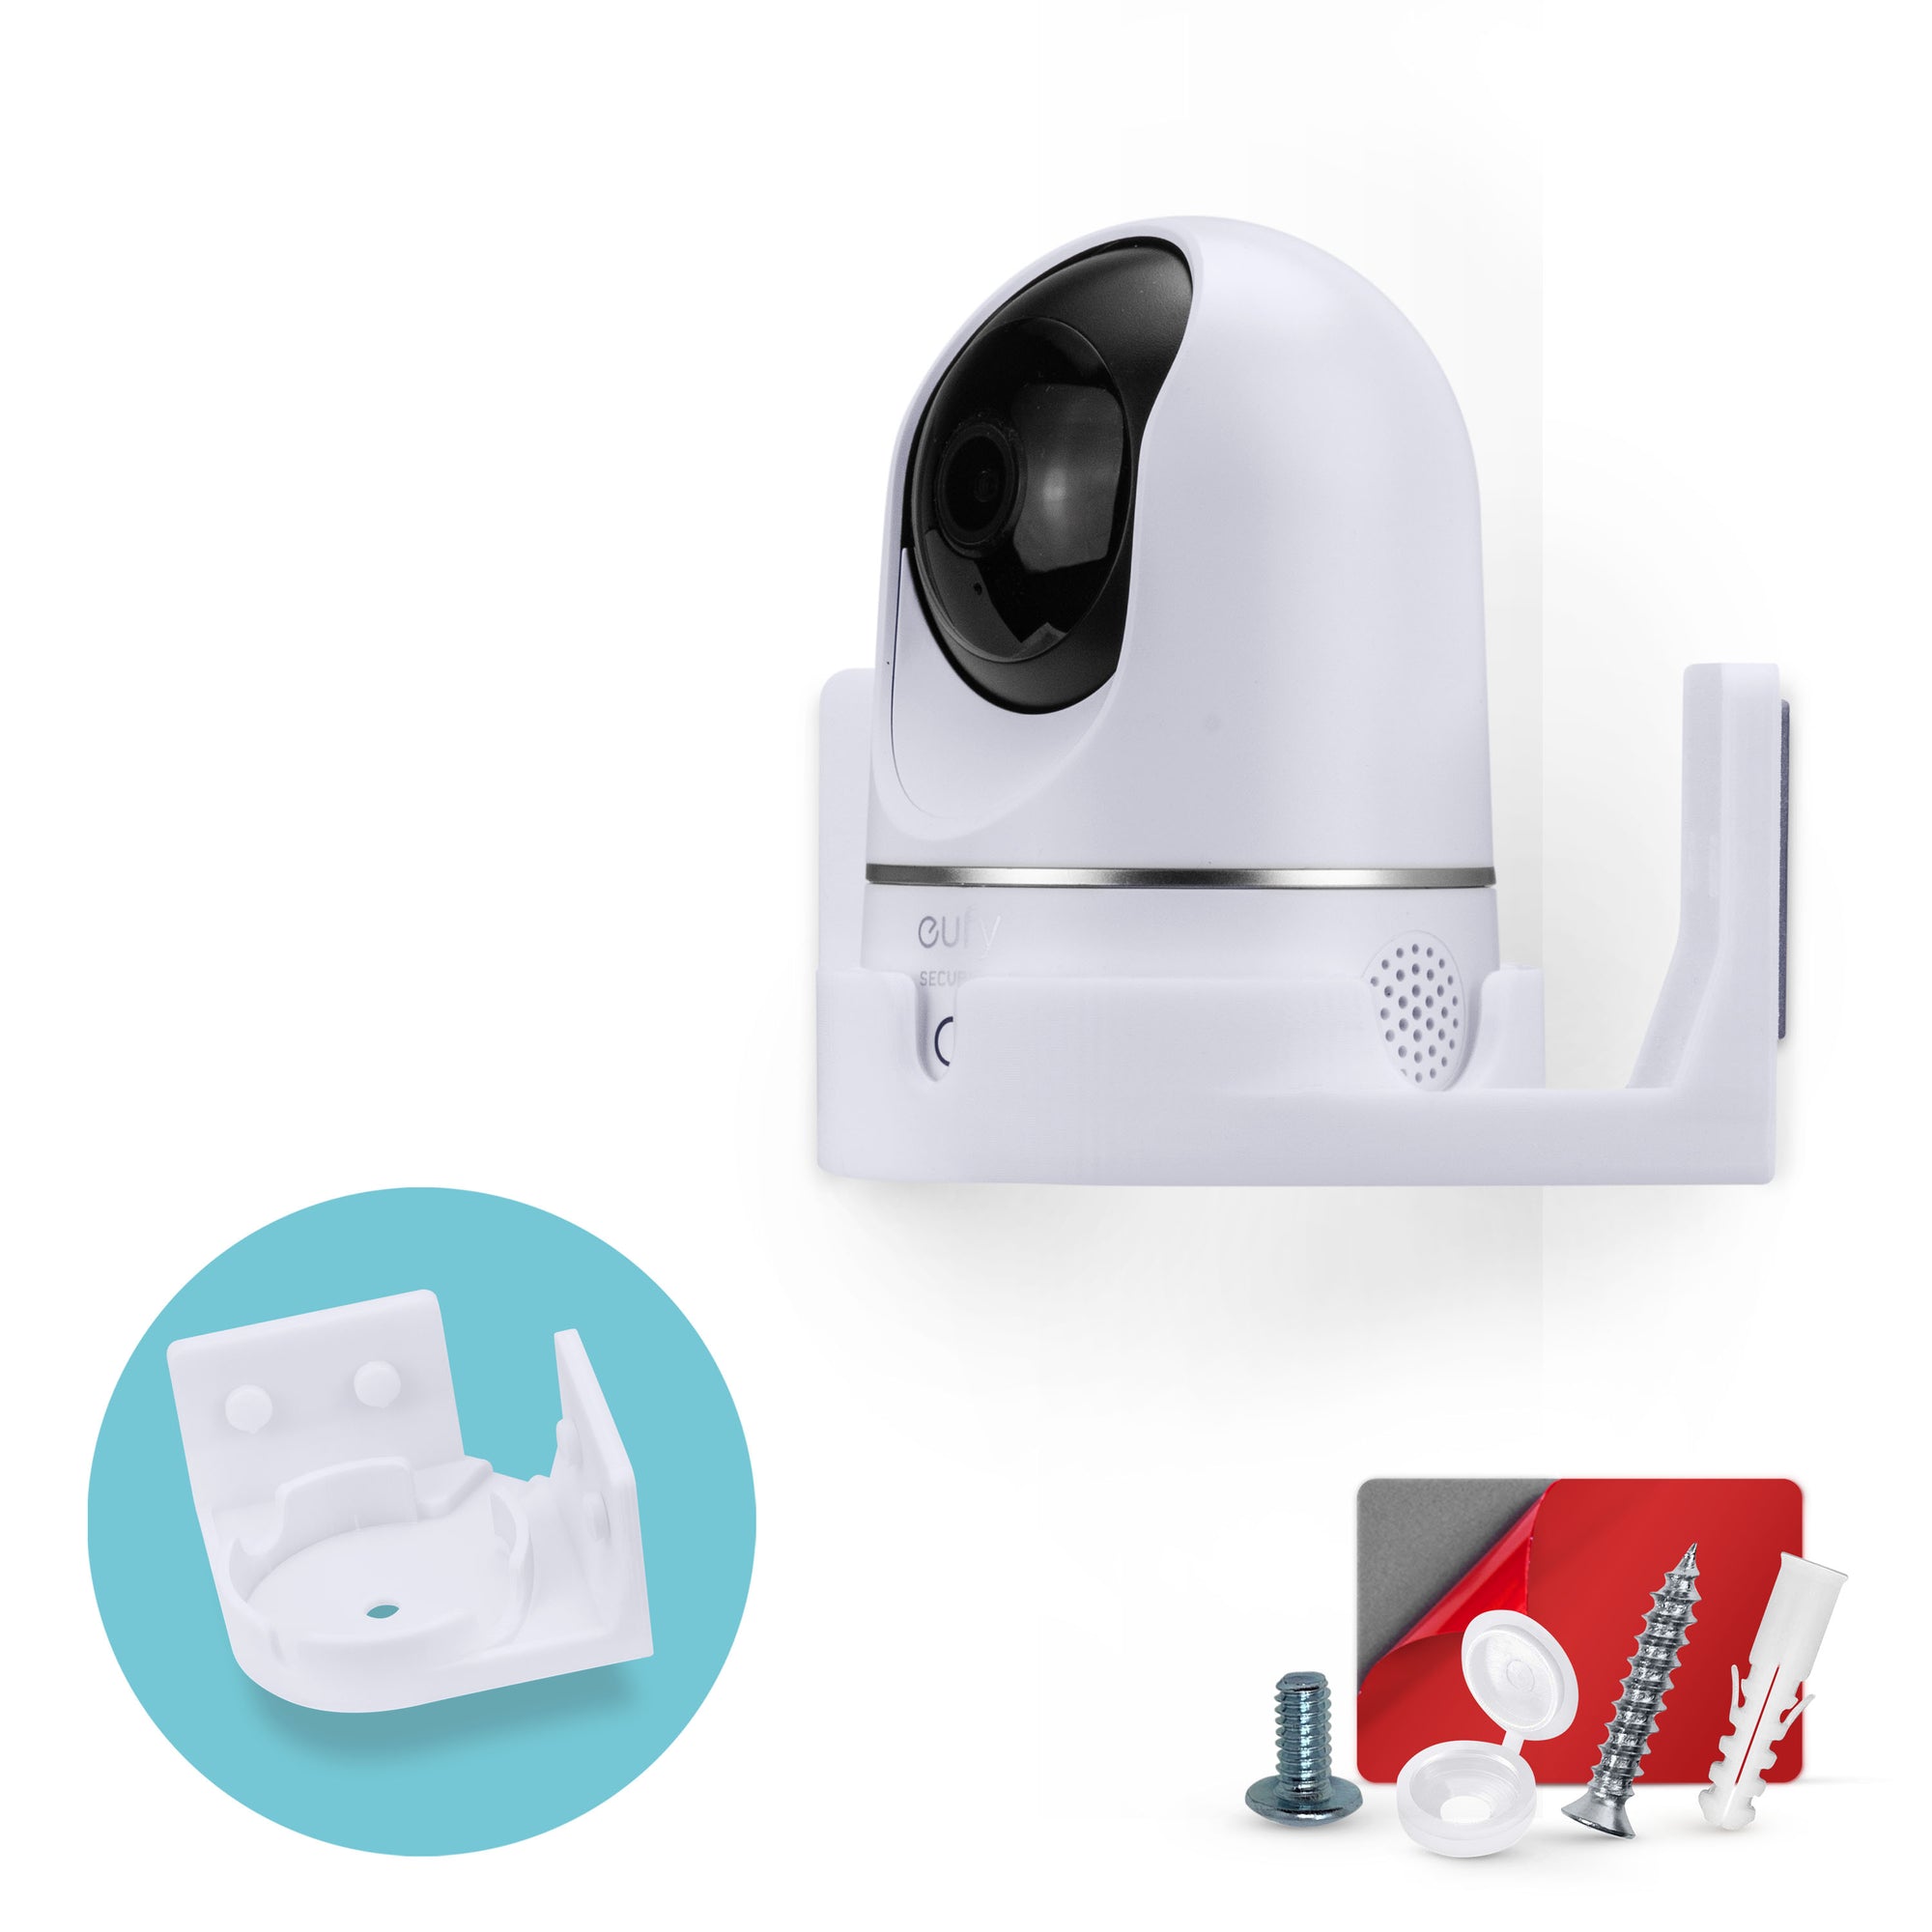 Corner Wall Mount Eufy S220 Indoor Camera (T84 10X),  Adhesive Security Camera Holder Bracket, Reduce Blind Spots & Clutter, Adhesive & Screw-In Mounting